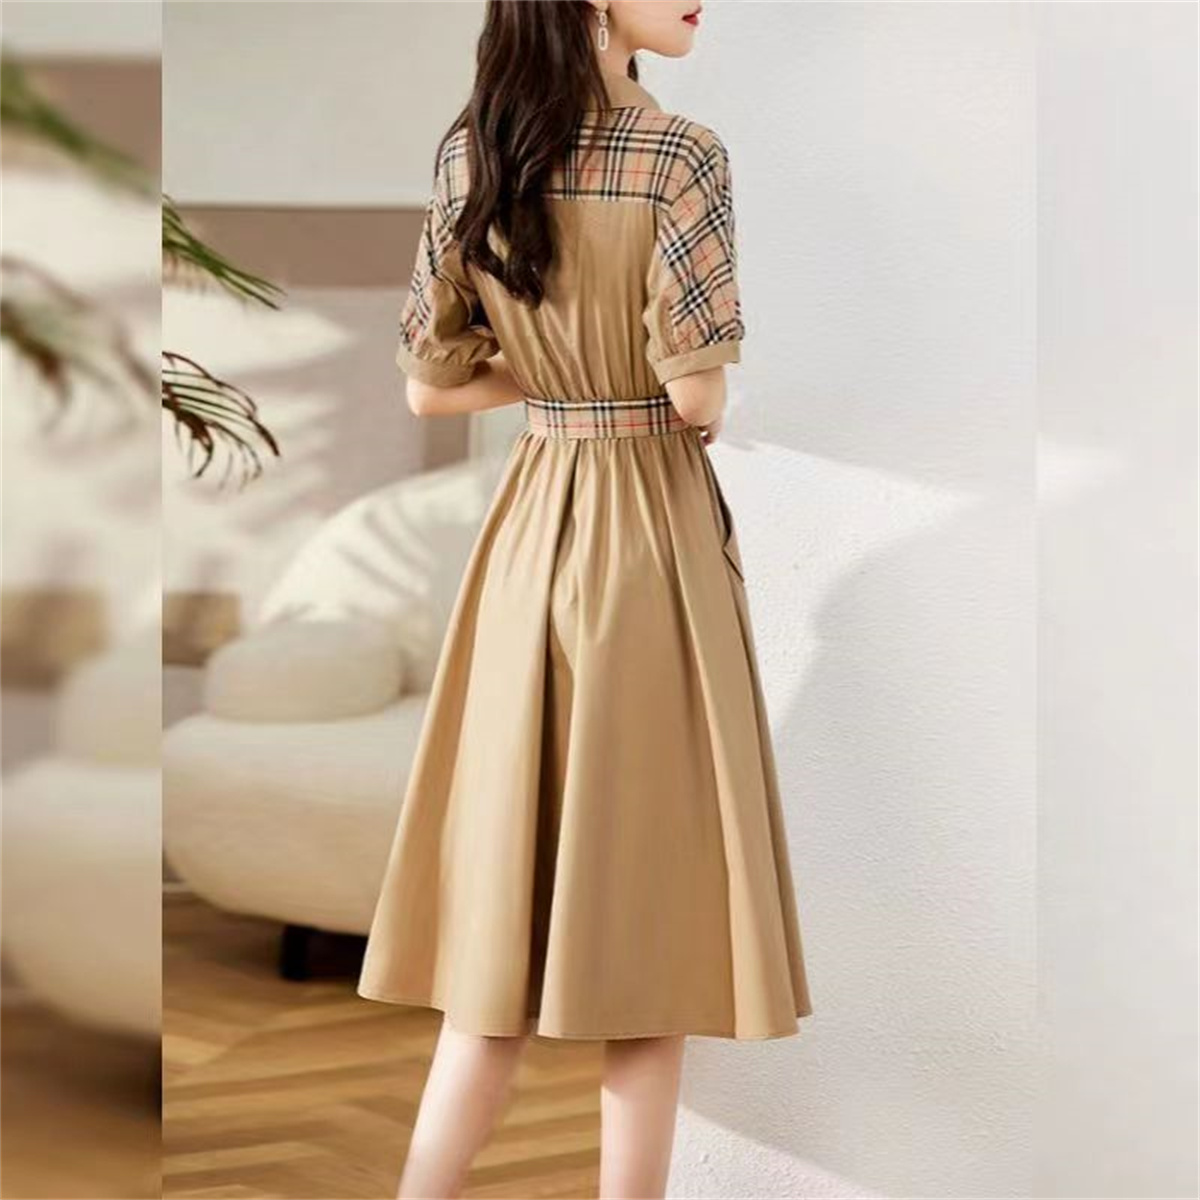 Women Dresses A line Mid Dress Elegant Sexy Blouse Ladies Splice Shirts Party One Piece Skirts Party Club Blouses Vestidos Evening Sundress Blouse Clothing